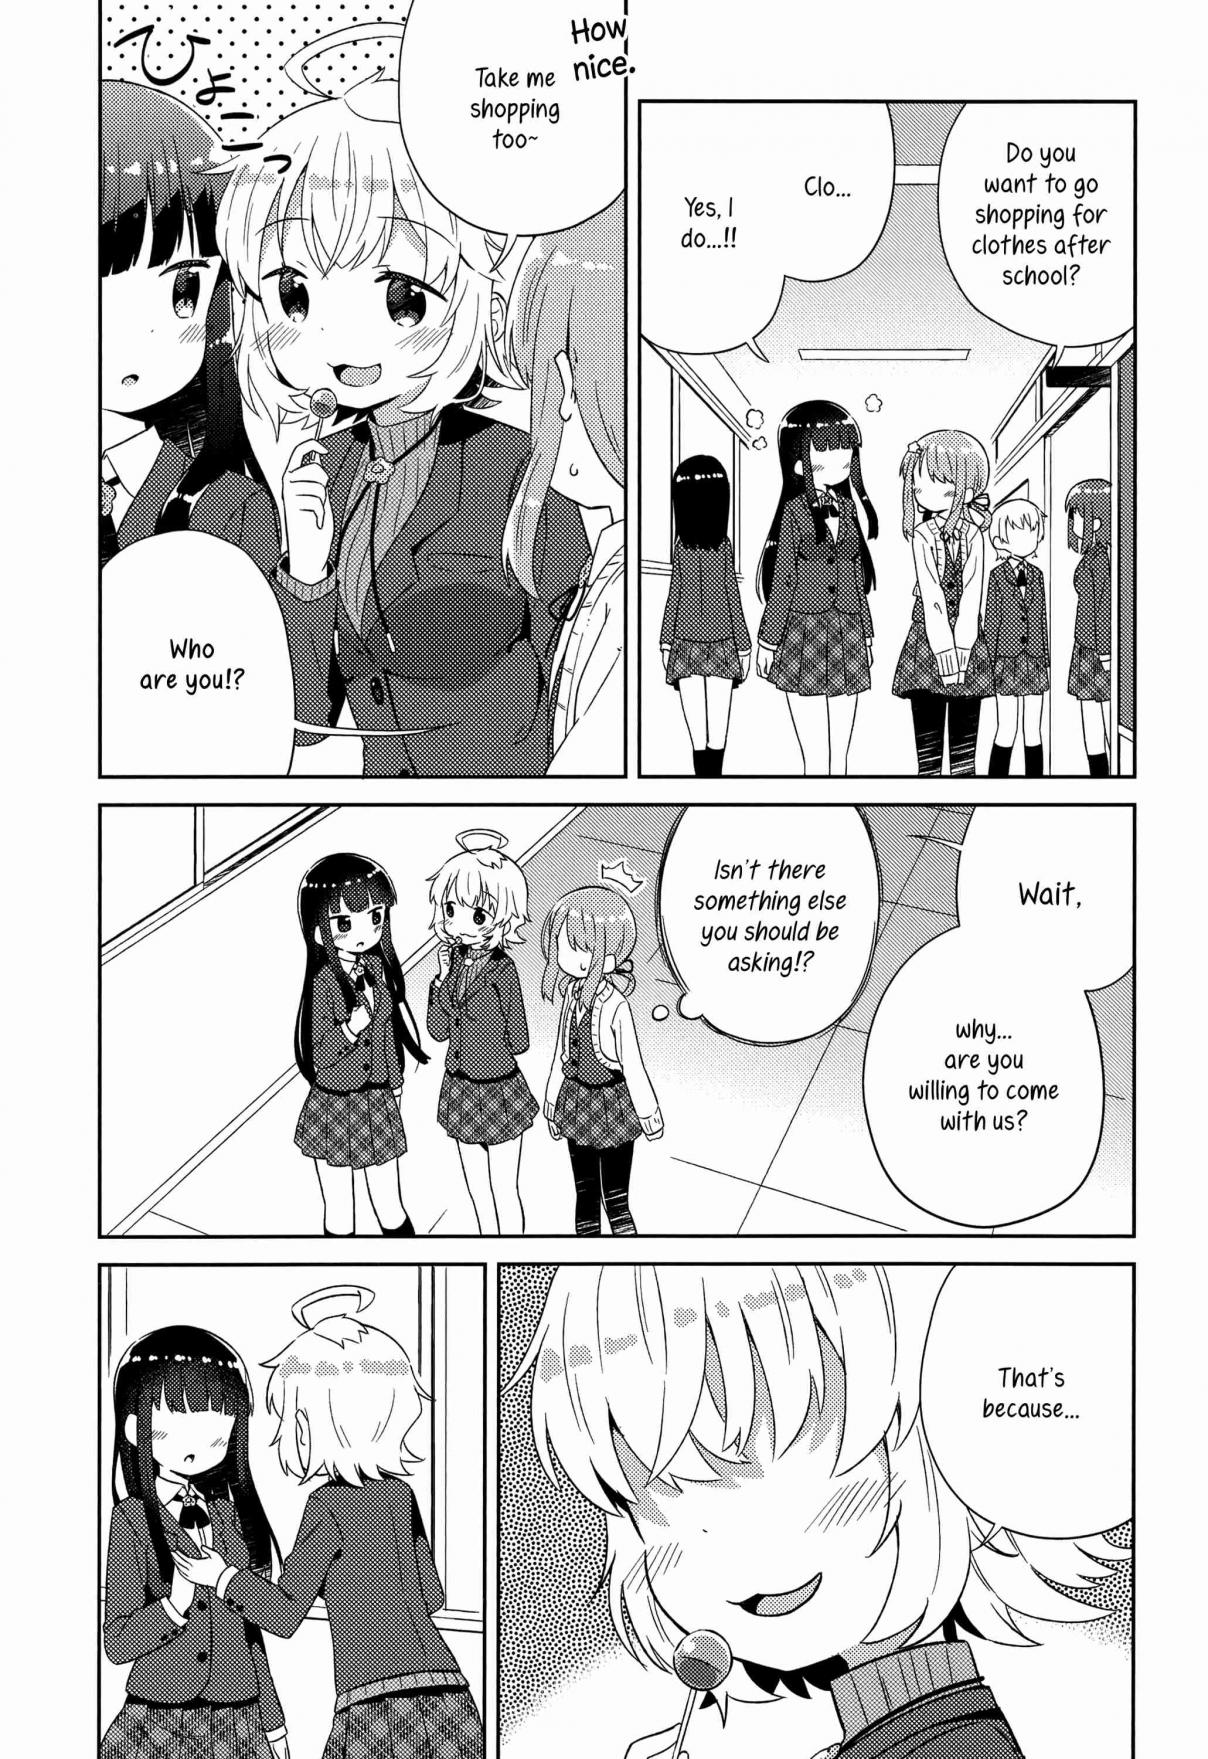 She Gets Girls Every day. Vol. 1 Ch. 3 The Yuri Queen appears.